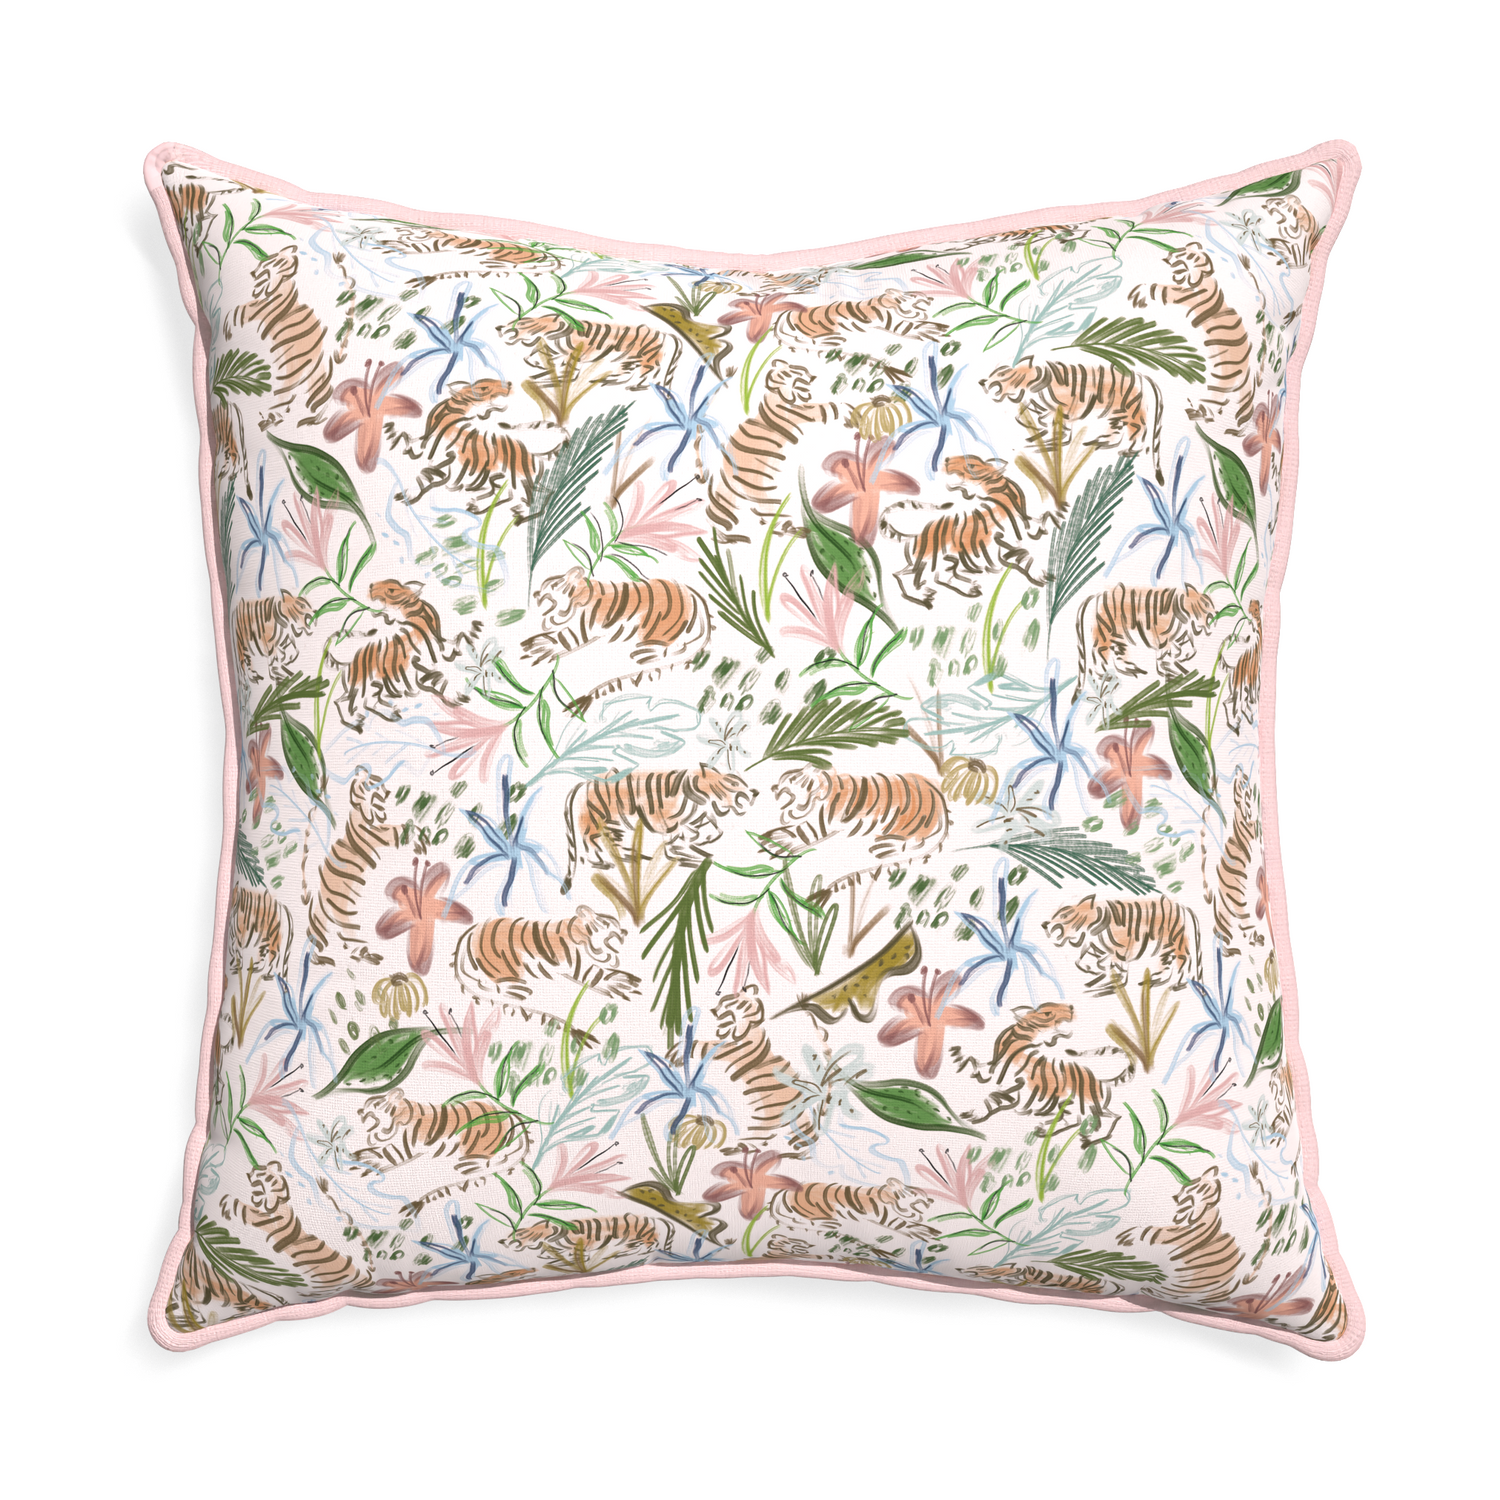 Euro-sham frida pink custom pink chinoiserie tigerpillow with petal piping on white background